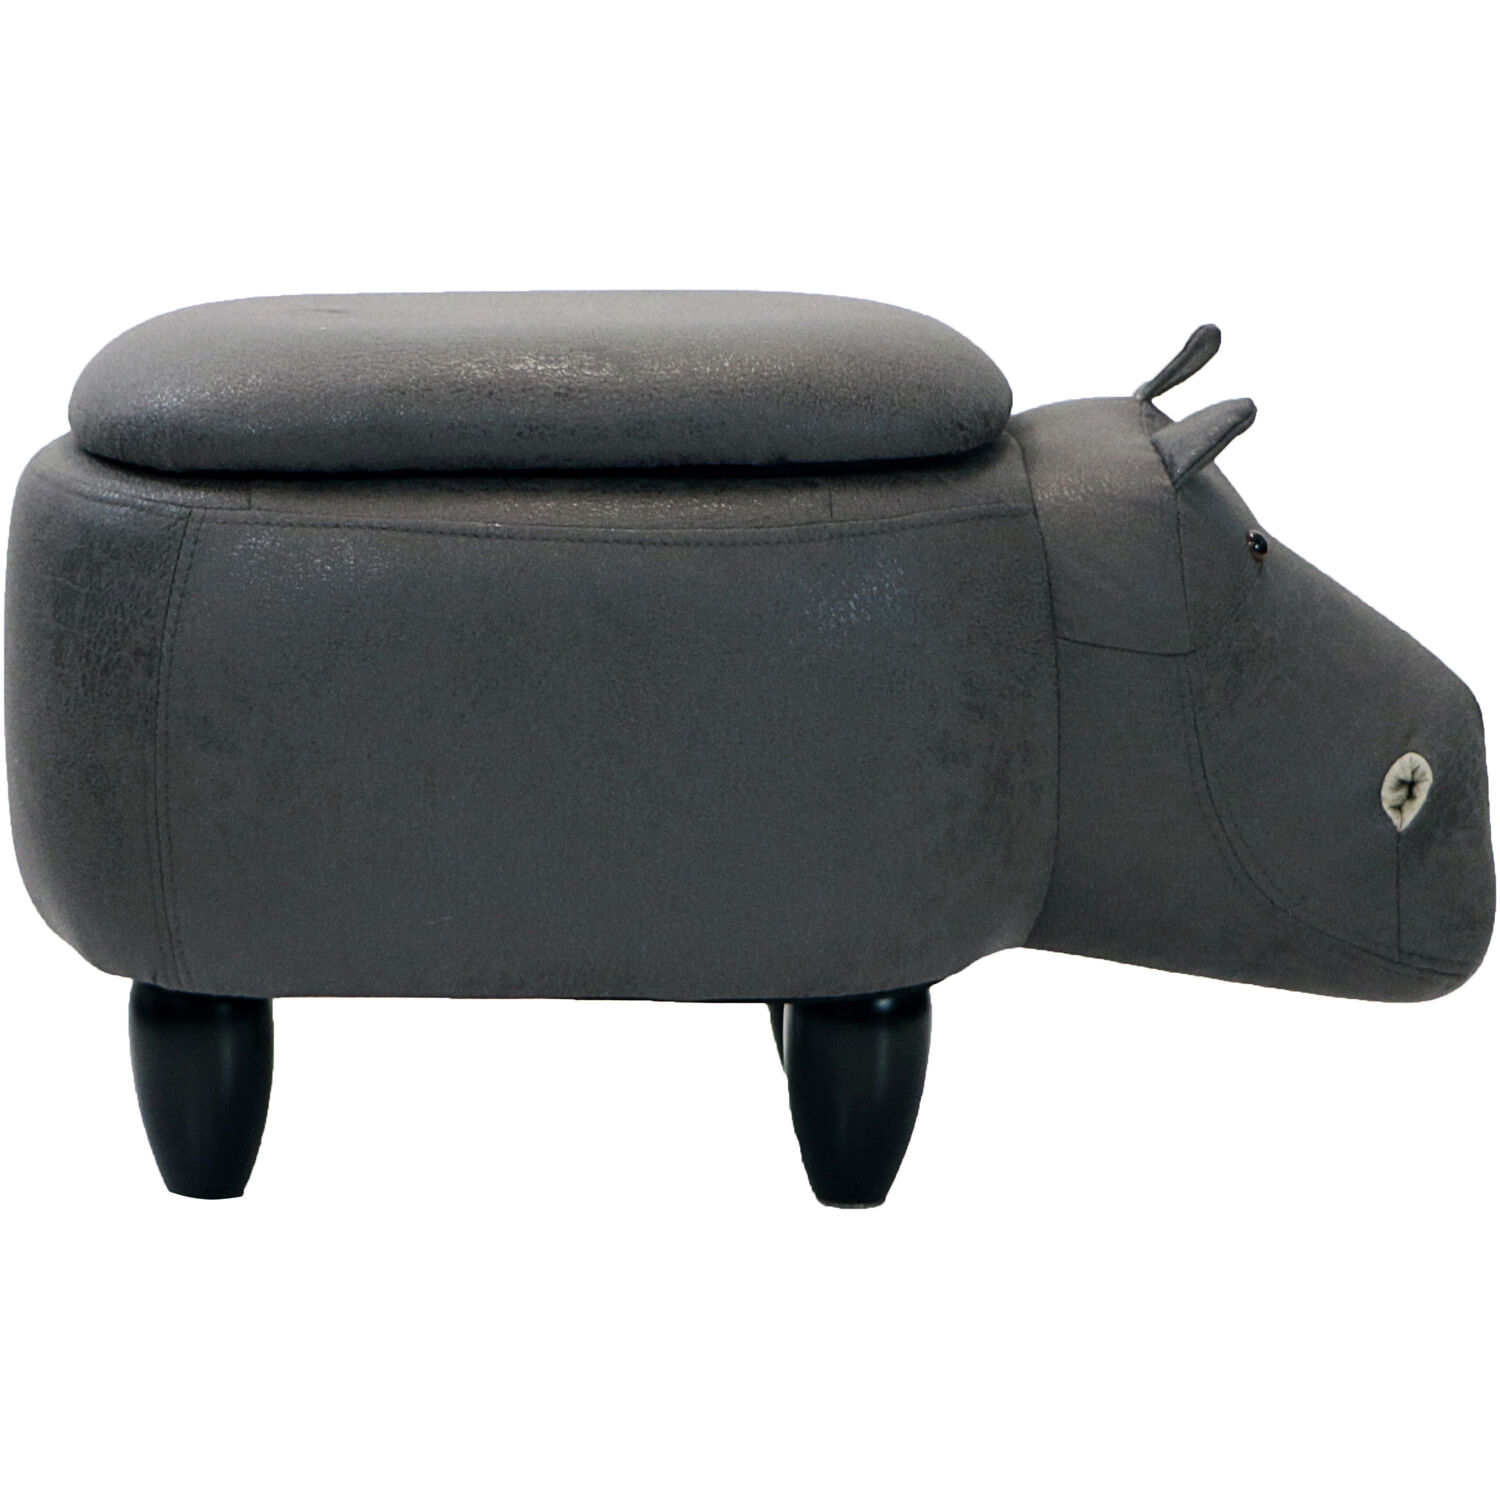 Critter Sitters 15-In. Seat Height Dark Gray Hippo Animal Shape Storage Ottoman - Furniture for Nursery, Bedroom, Playroom, and Living Room Decor - image 4 of 19